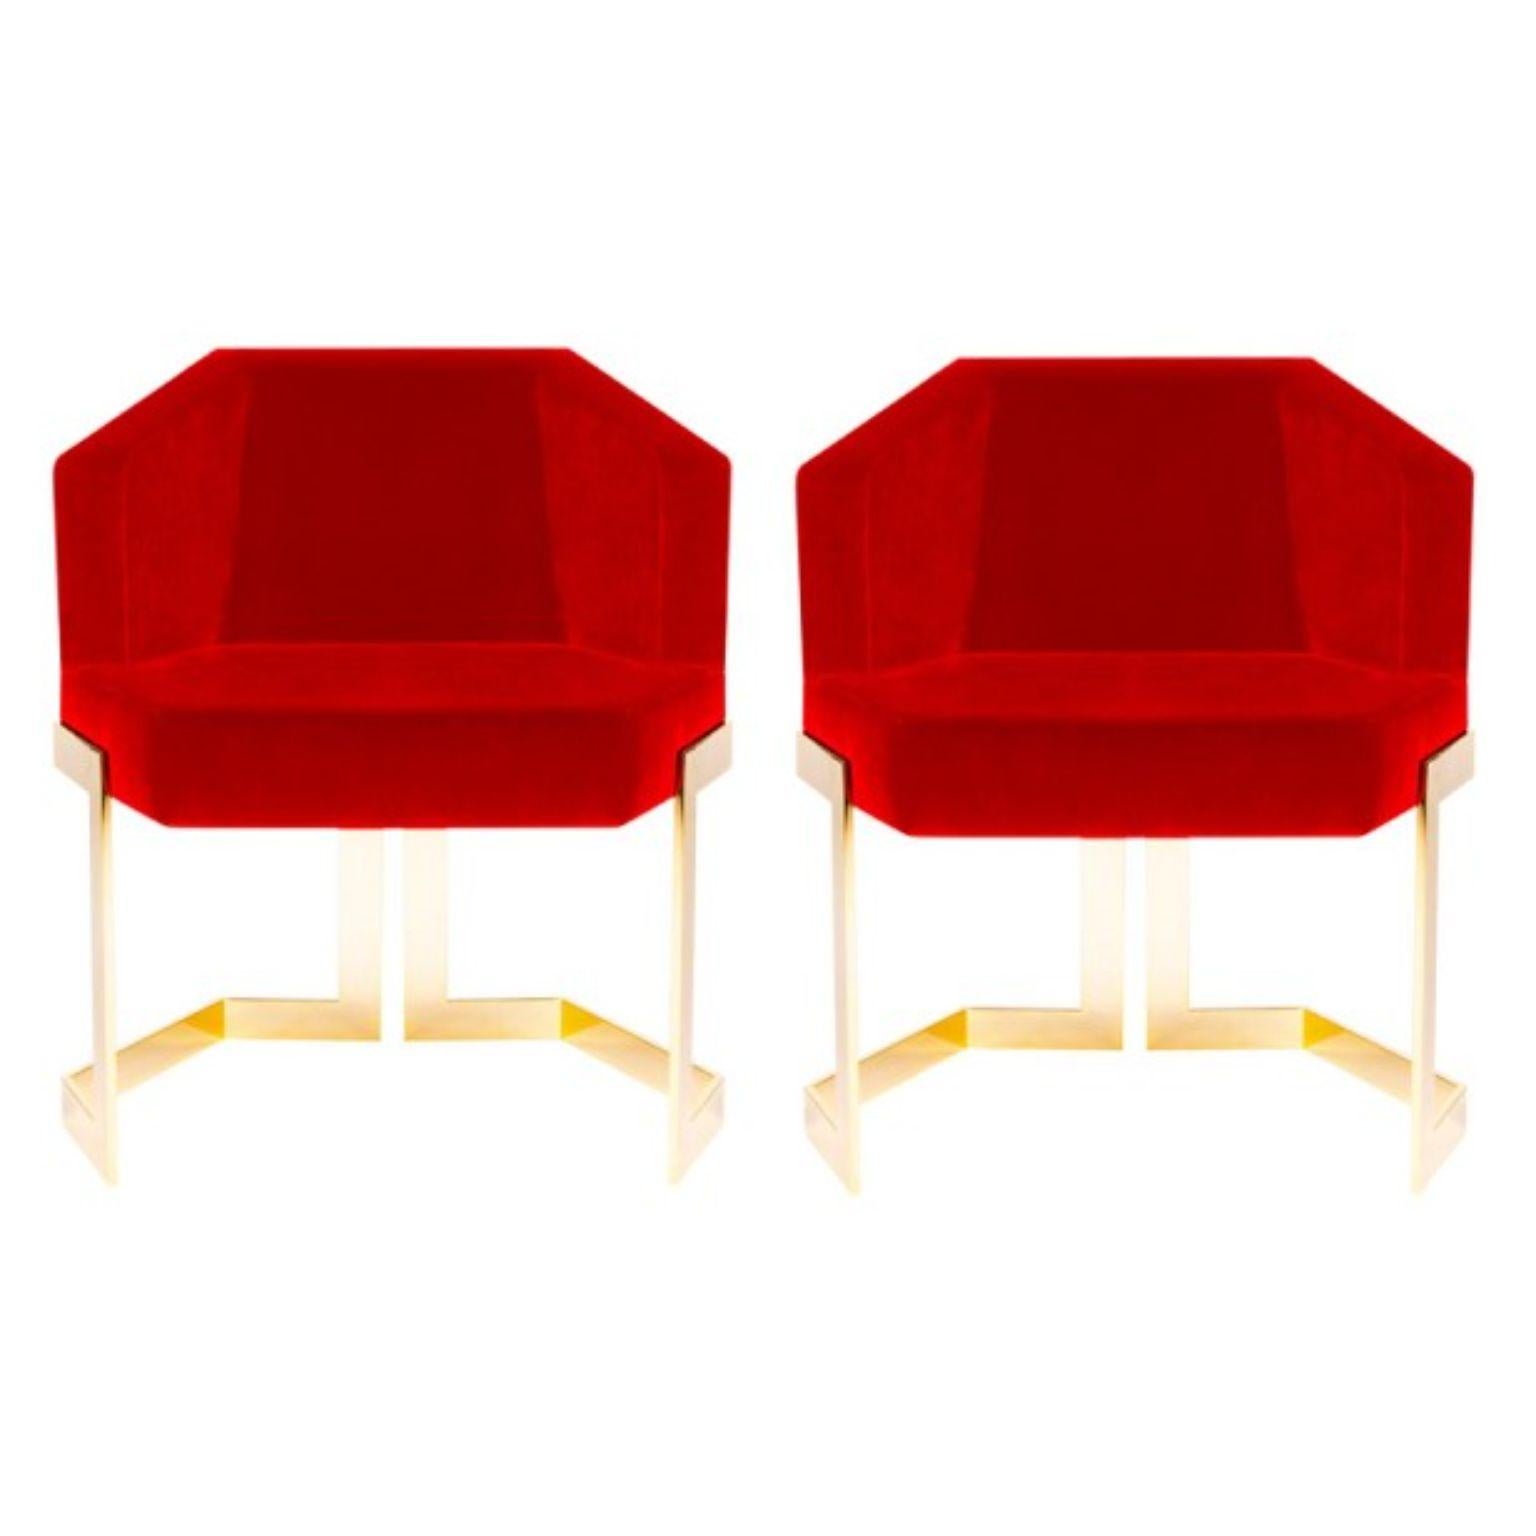 Set of 2 The hive dining chairs, Royal Stranger
Dimensions: 65.5 x 55 x 79 cm.
Materials: Velvet. Legs polished brass.


A chair with an extremely luxurious vision. The Hive chair, as the name implies, is strong and robust in nature, its